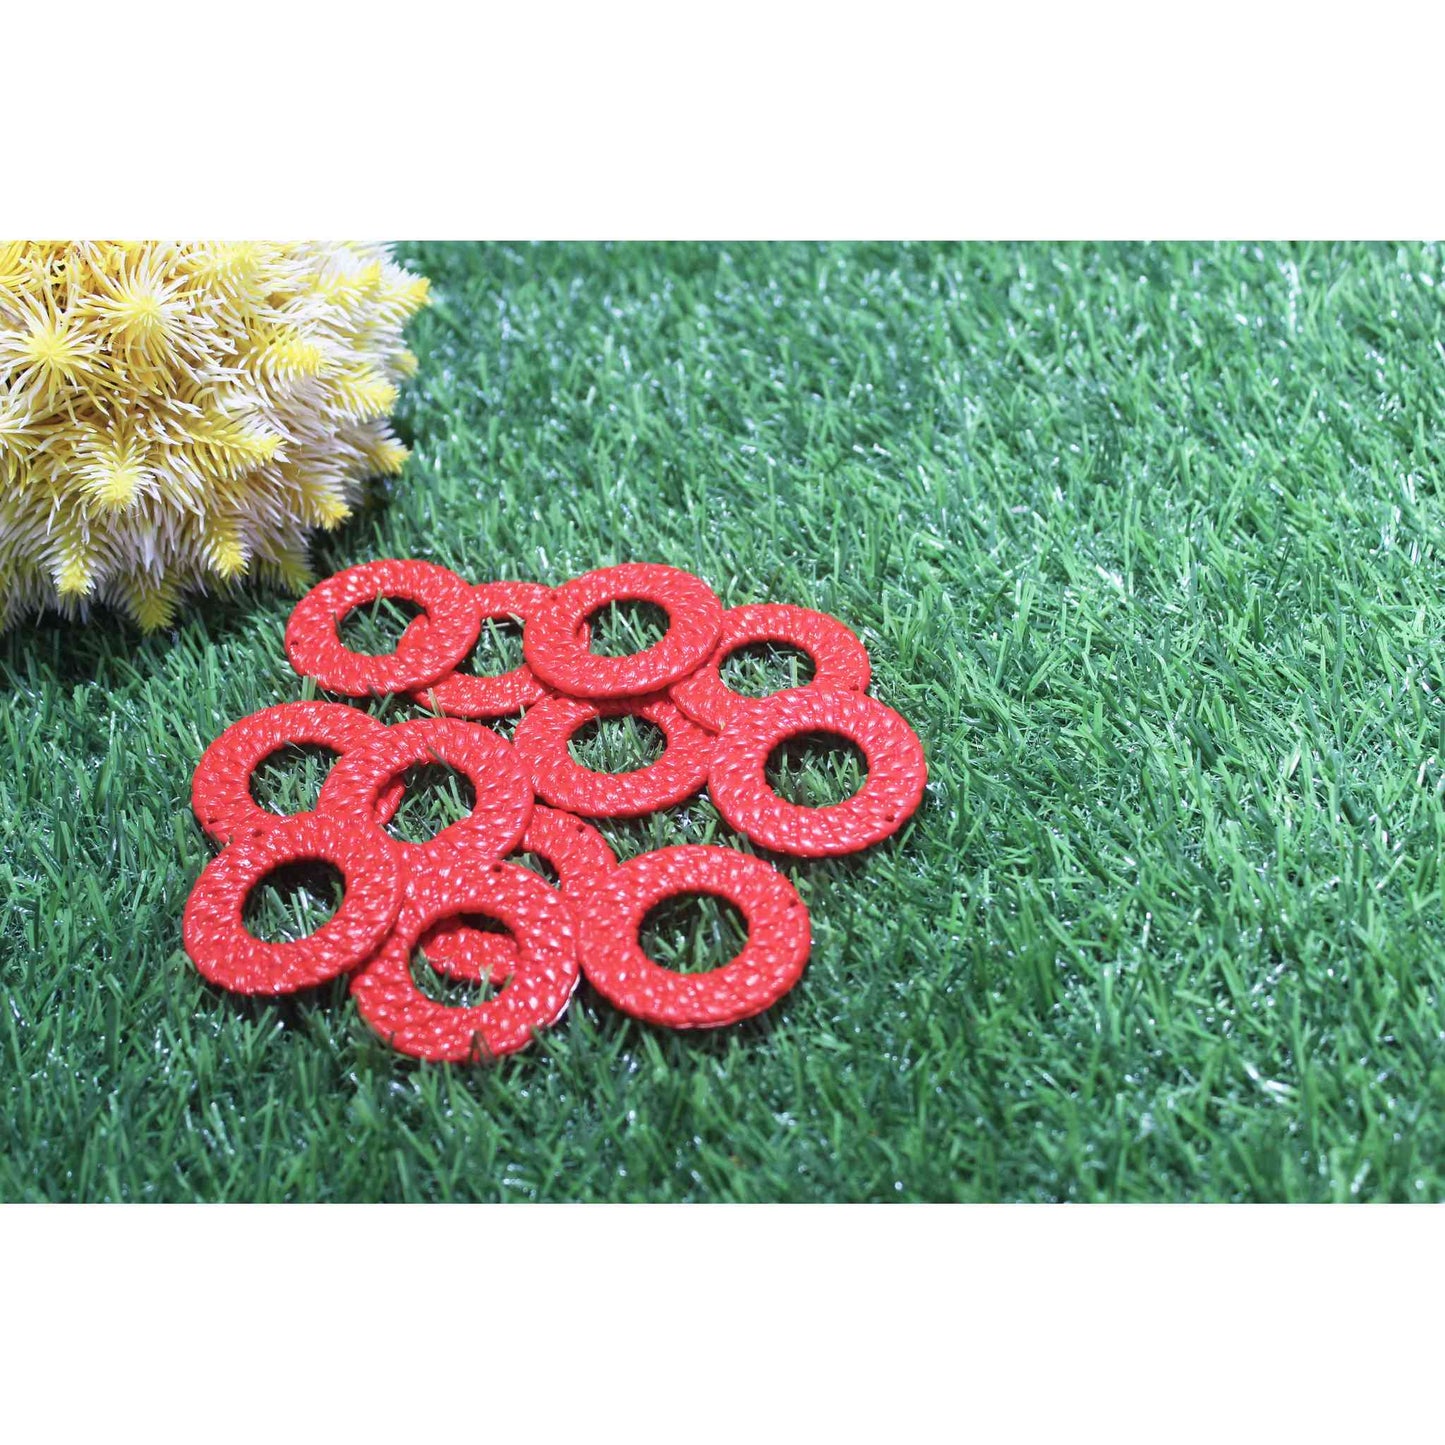 Indian Petals Beautiful Flat Braided Style Base for DIY Craft, Trousseau Packing or Decoration, Round, Red - Indian Petals